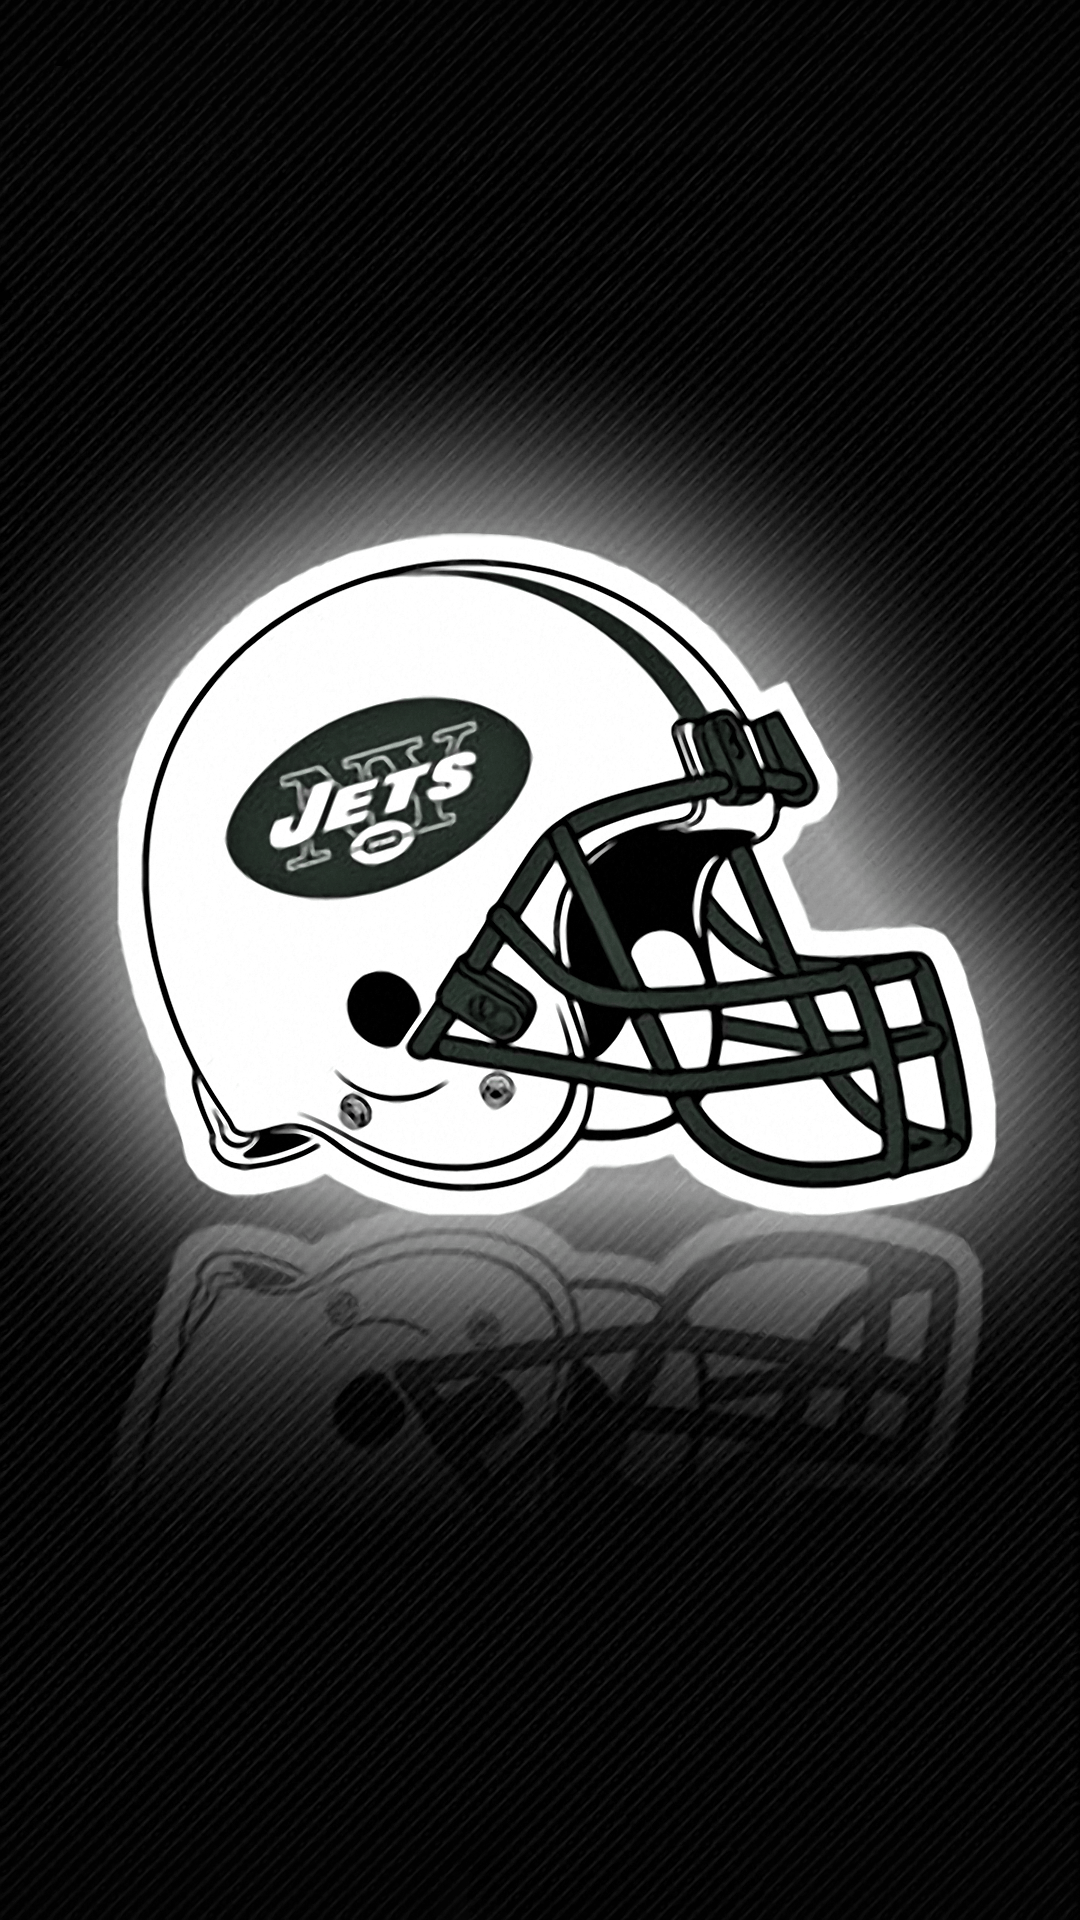 NY Jets iPhone 6 Plus Wallpaper (1080x1920)